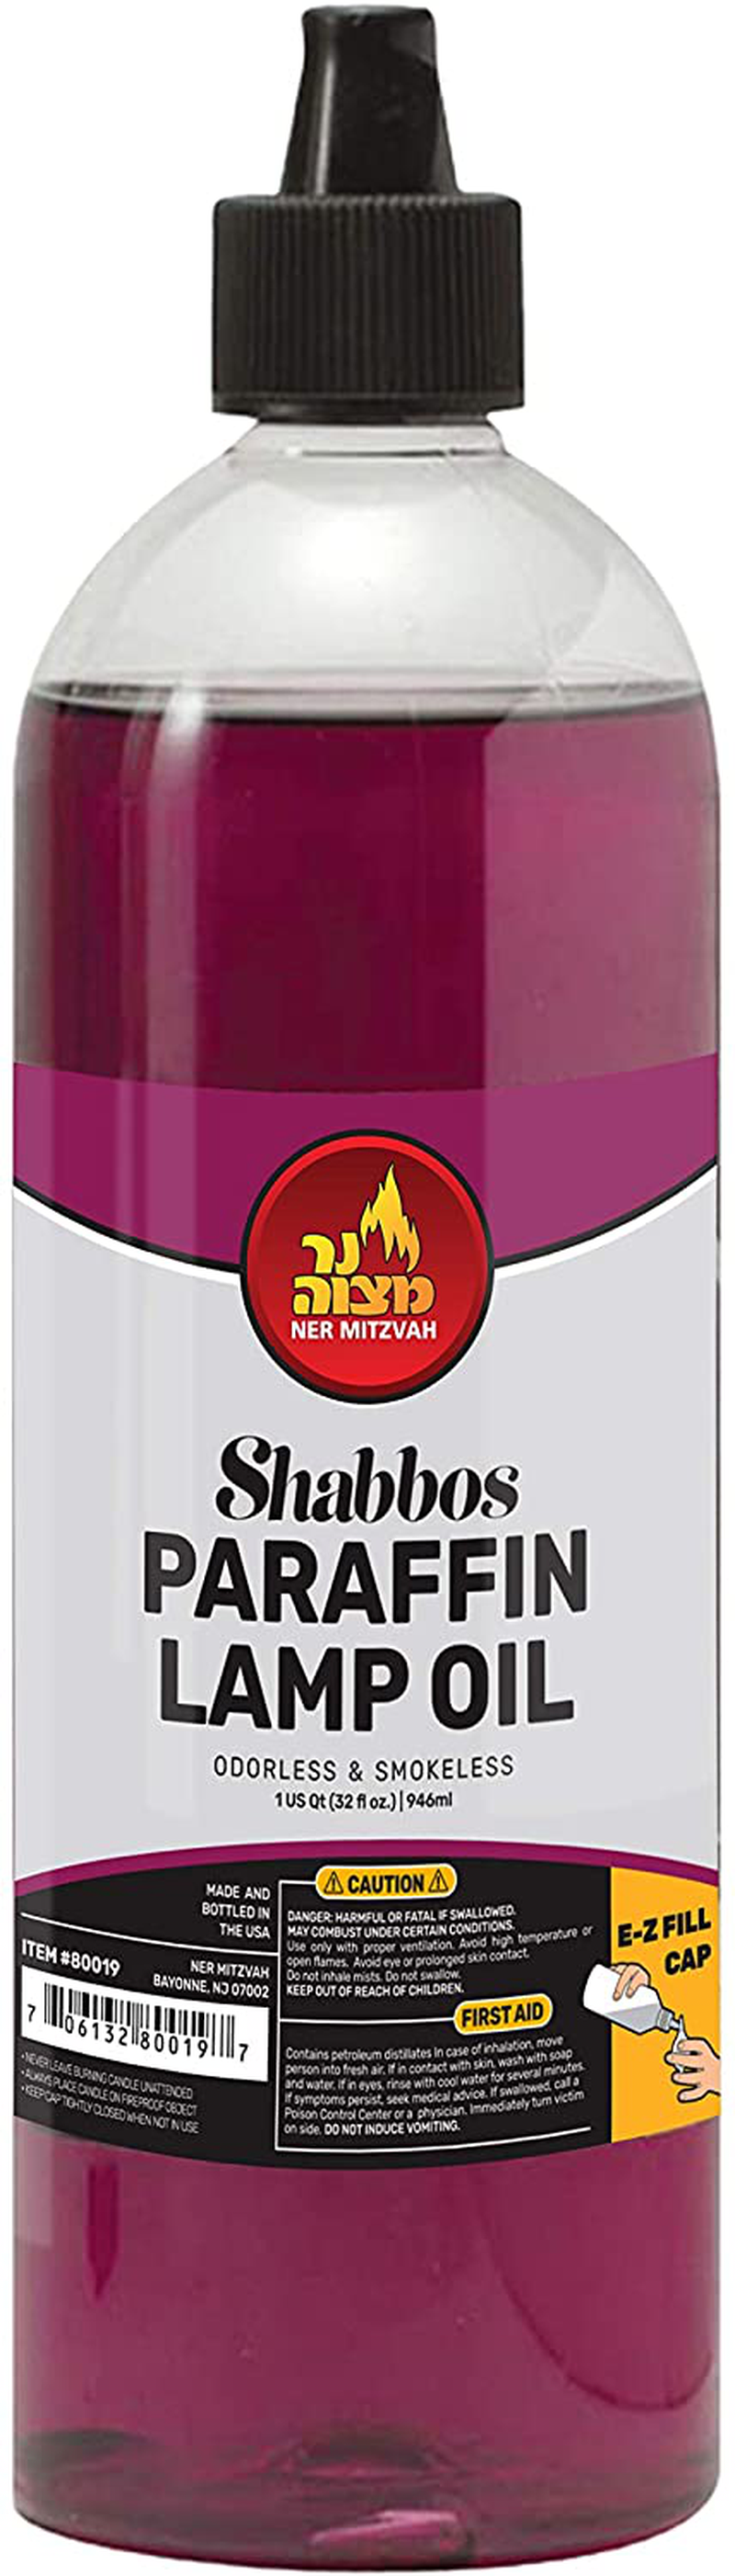 Paraffin Lamp Oil - Purple Smokeless, Odorless, Clean Burning Fuel for Indoor and Outdoor Use with E-Z Fill Cap and Pouring Spout - 32oz - by Ner Mitzvah Home & Garden > Lighting Accessories > Oil Lamp Fuel Ner Mitzvah Default Title  